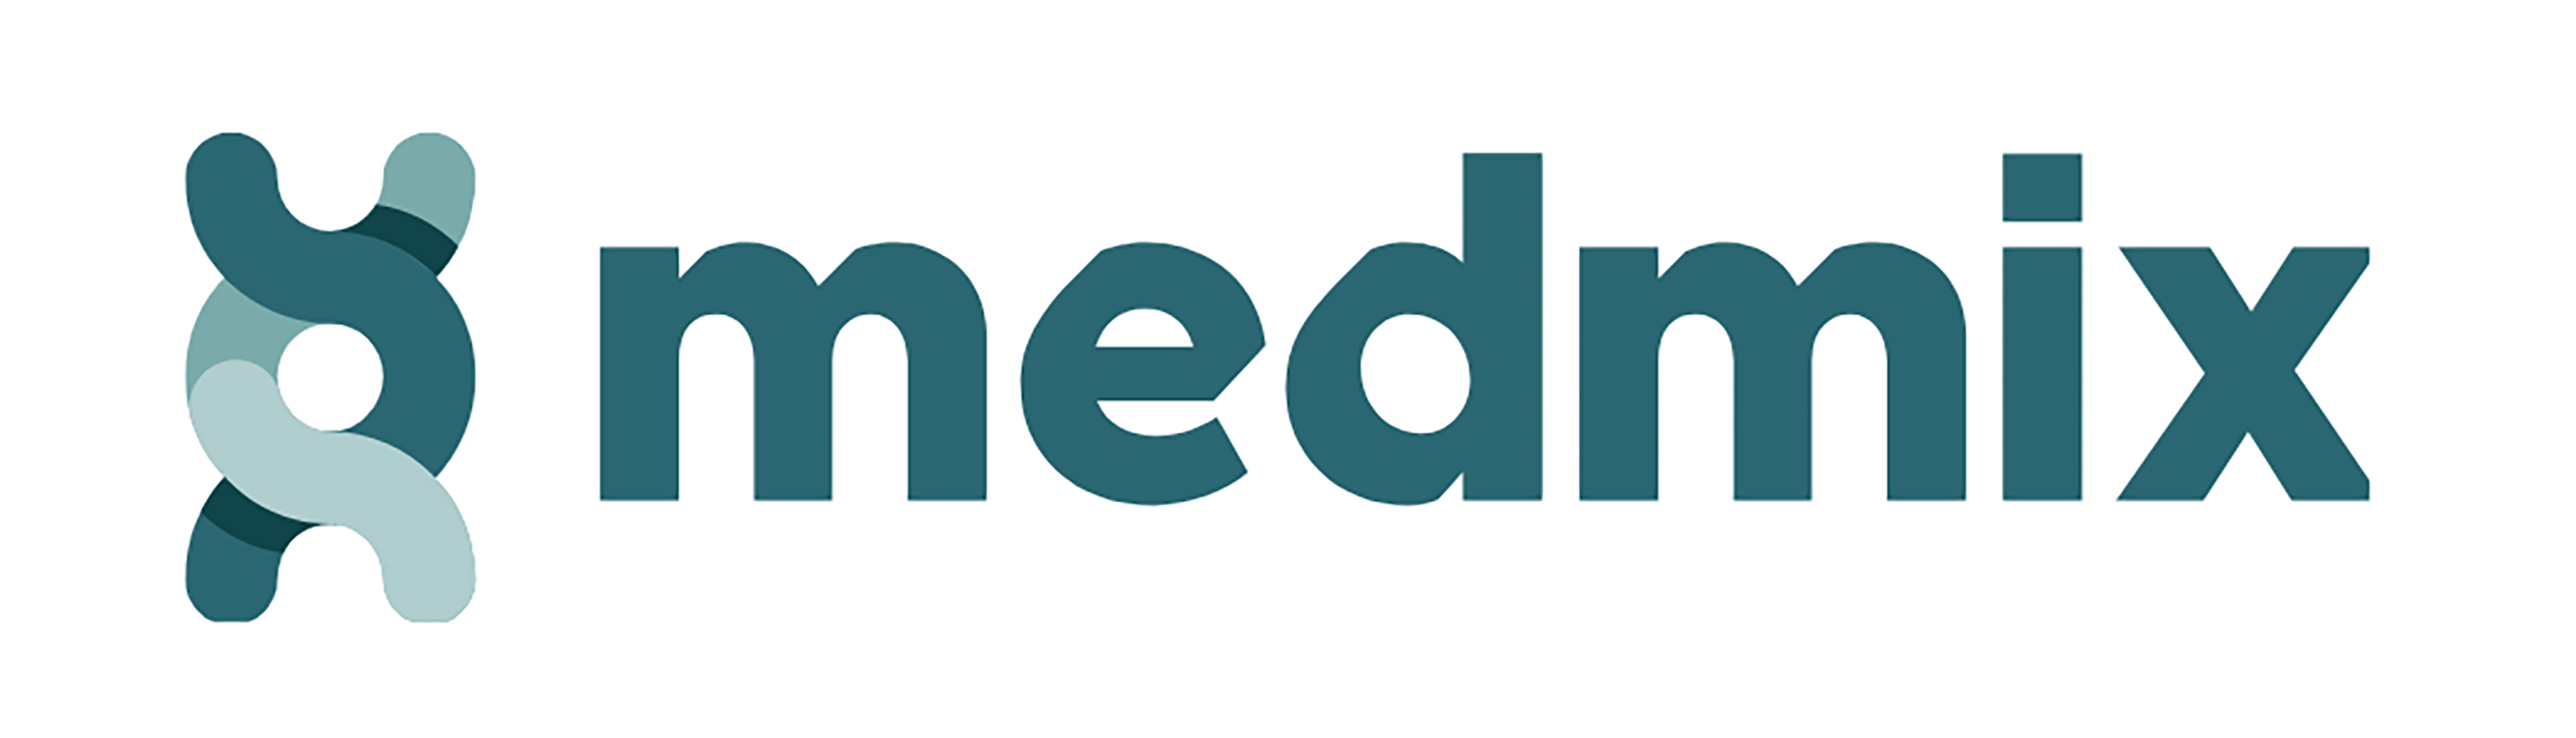 Using its knowledge and technological capabilities, medmix is working towards a sustainable future with several product innovations and trademarks.